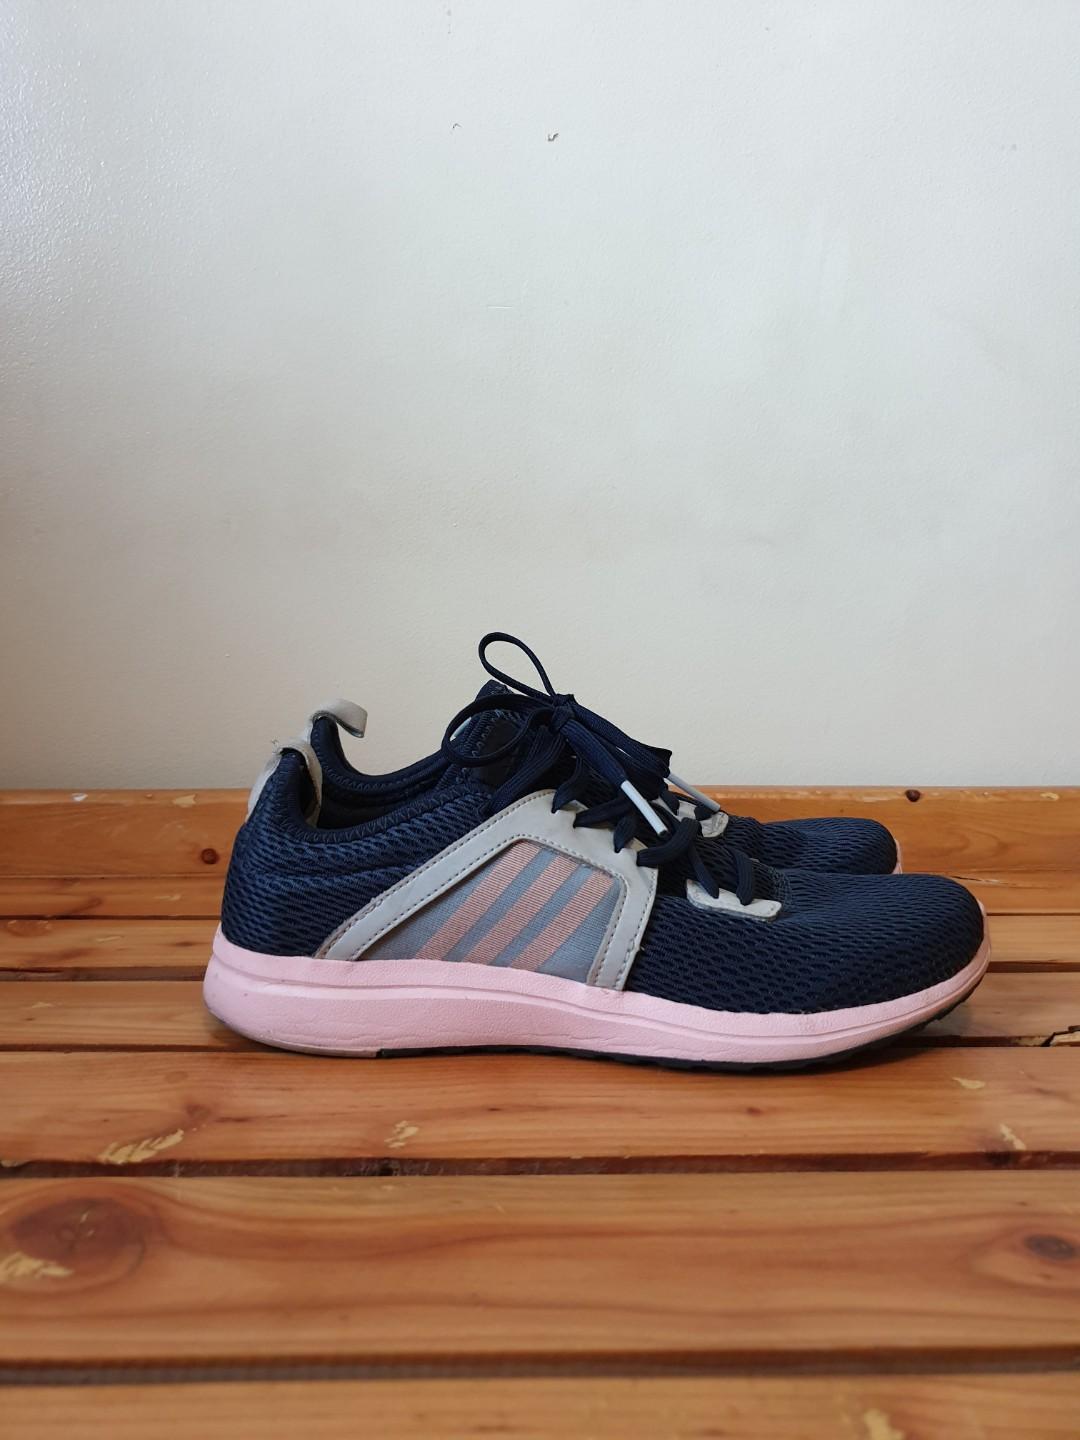 adidas supercloud shoes